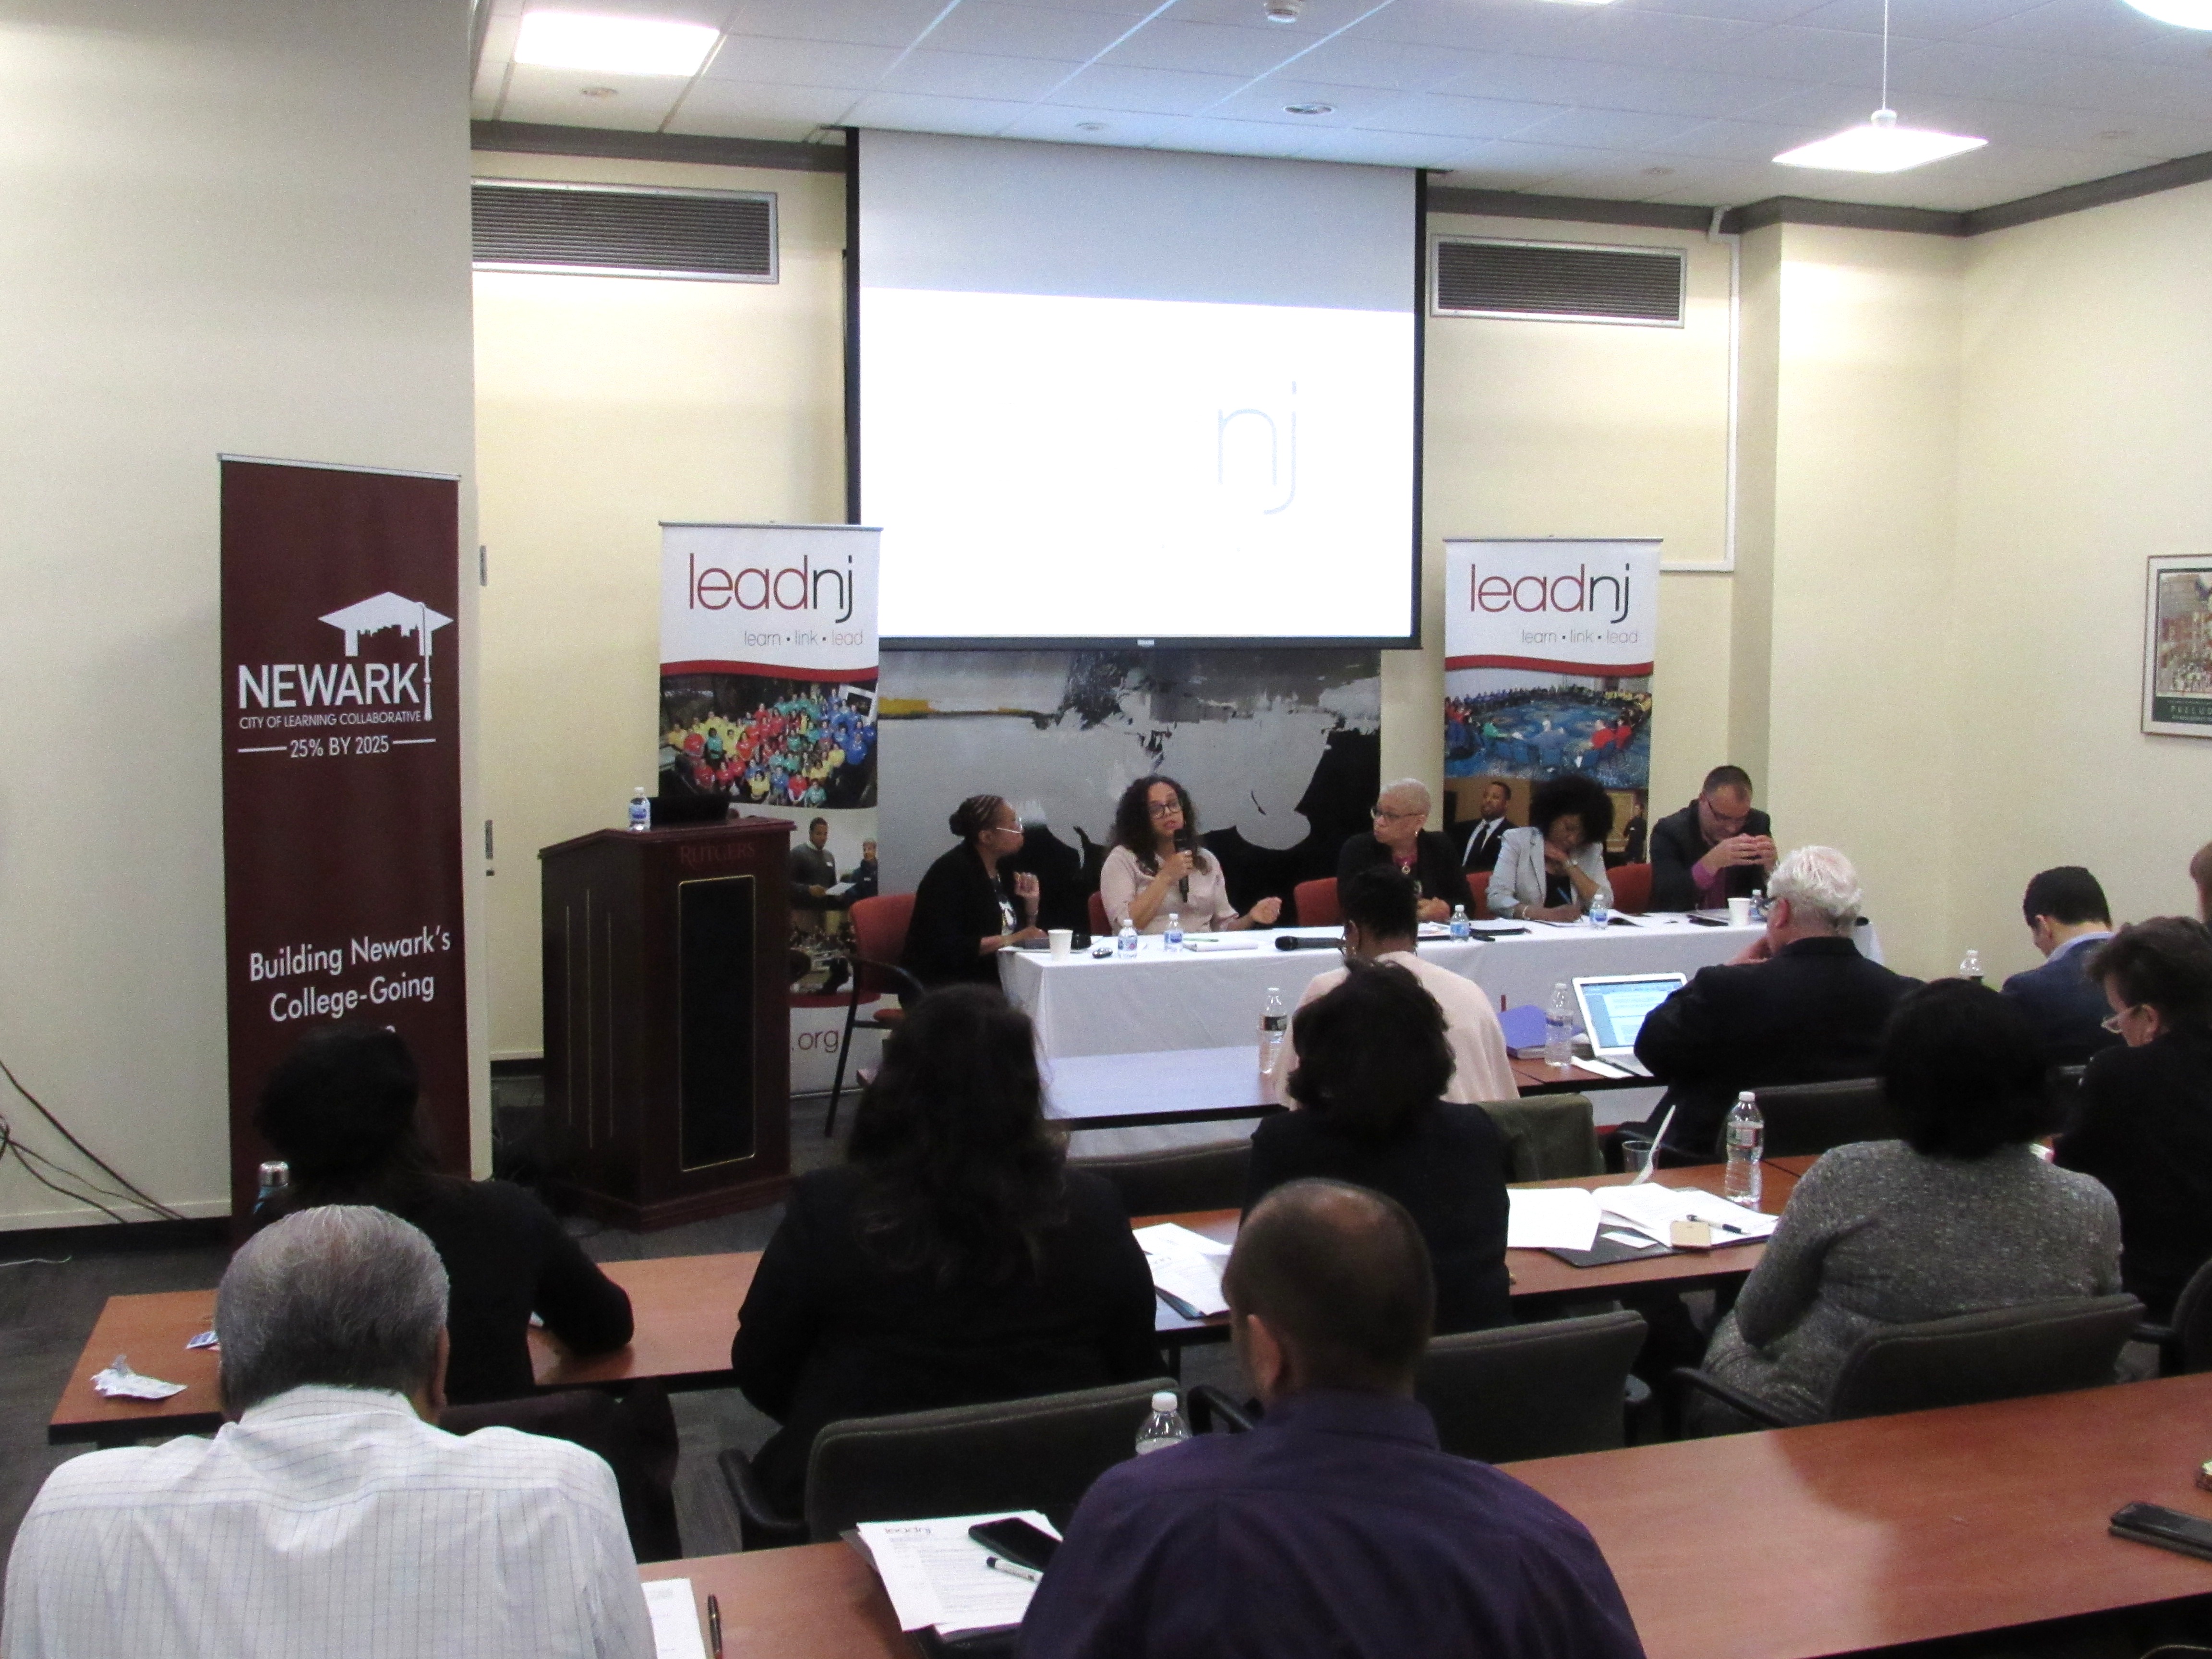 NCLC hosts Lead New Jersey on the Rutgers-Newark Campus